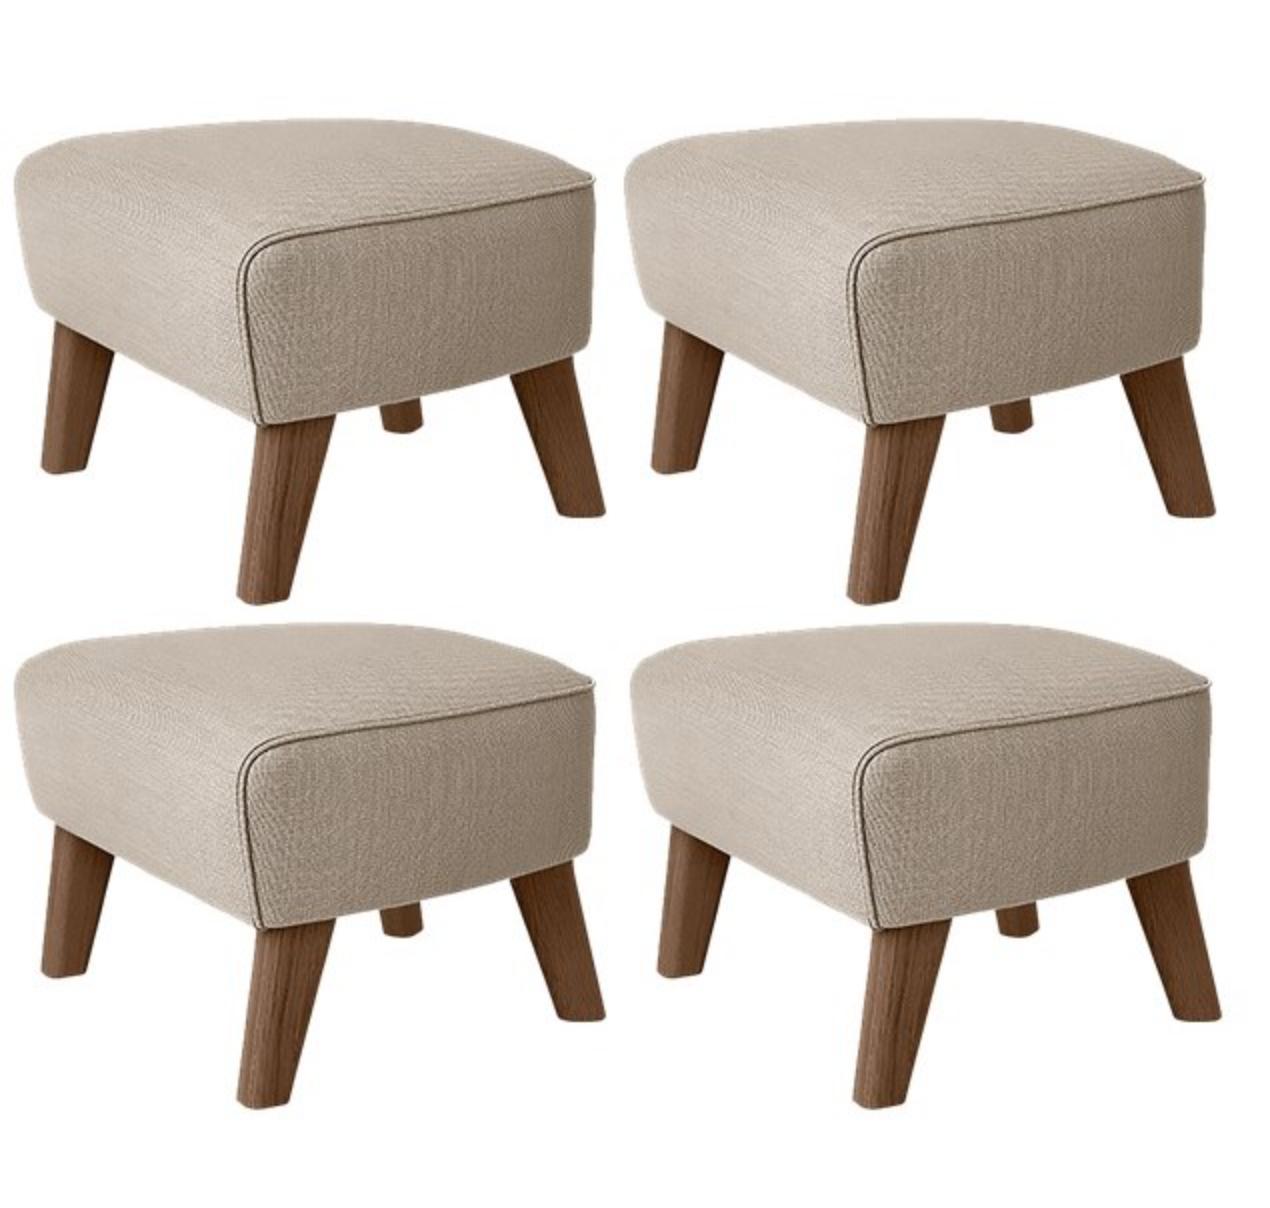 Set of 4 beige and smoked Oak Sahco Zero footstool by Lassen
Dimensions: w 56 x d 58 x h 40 cm 
Materials: Textile
Also Available: Other colors available.

The My Own Chair footstool has been designed in the same spirit as Flemming Lassen’s